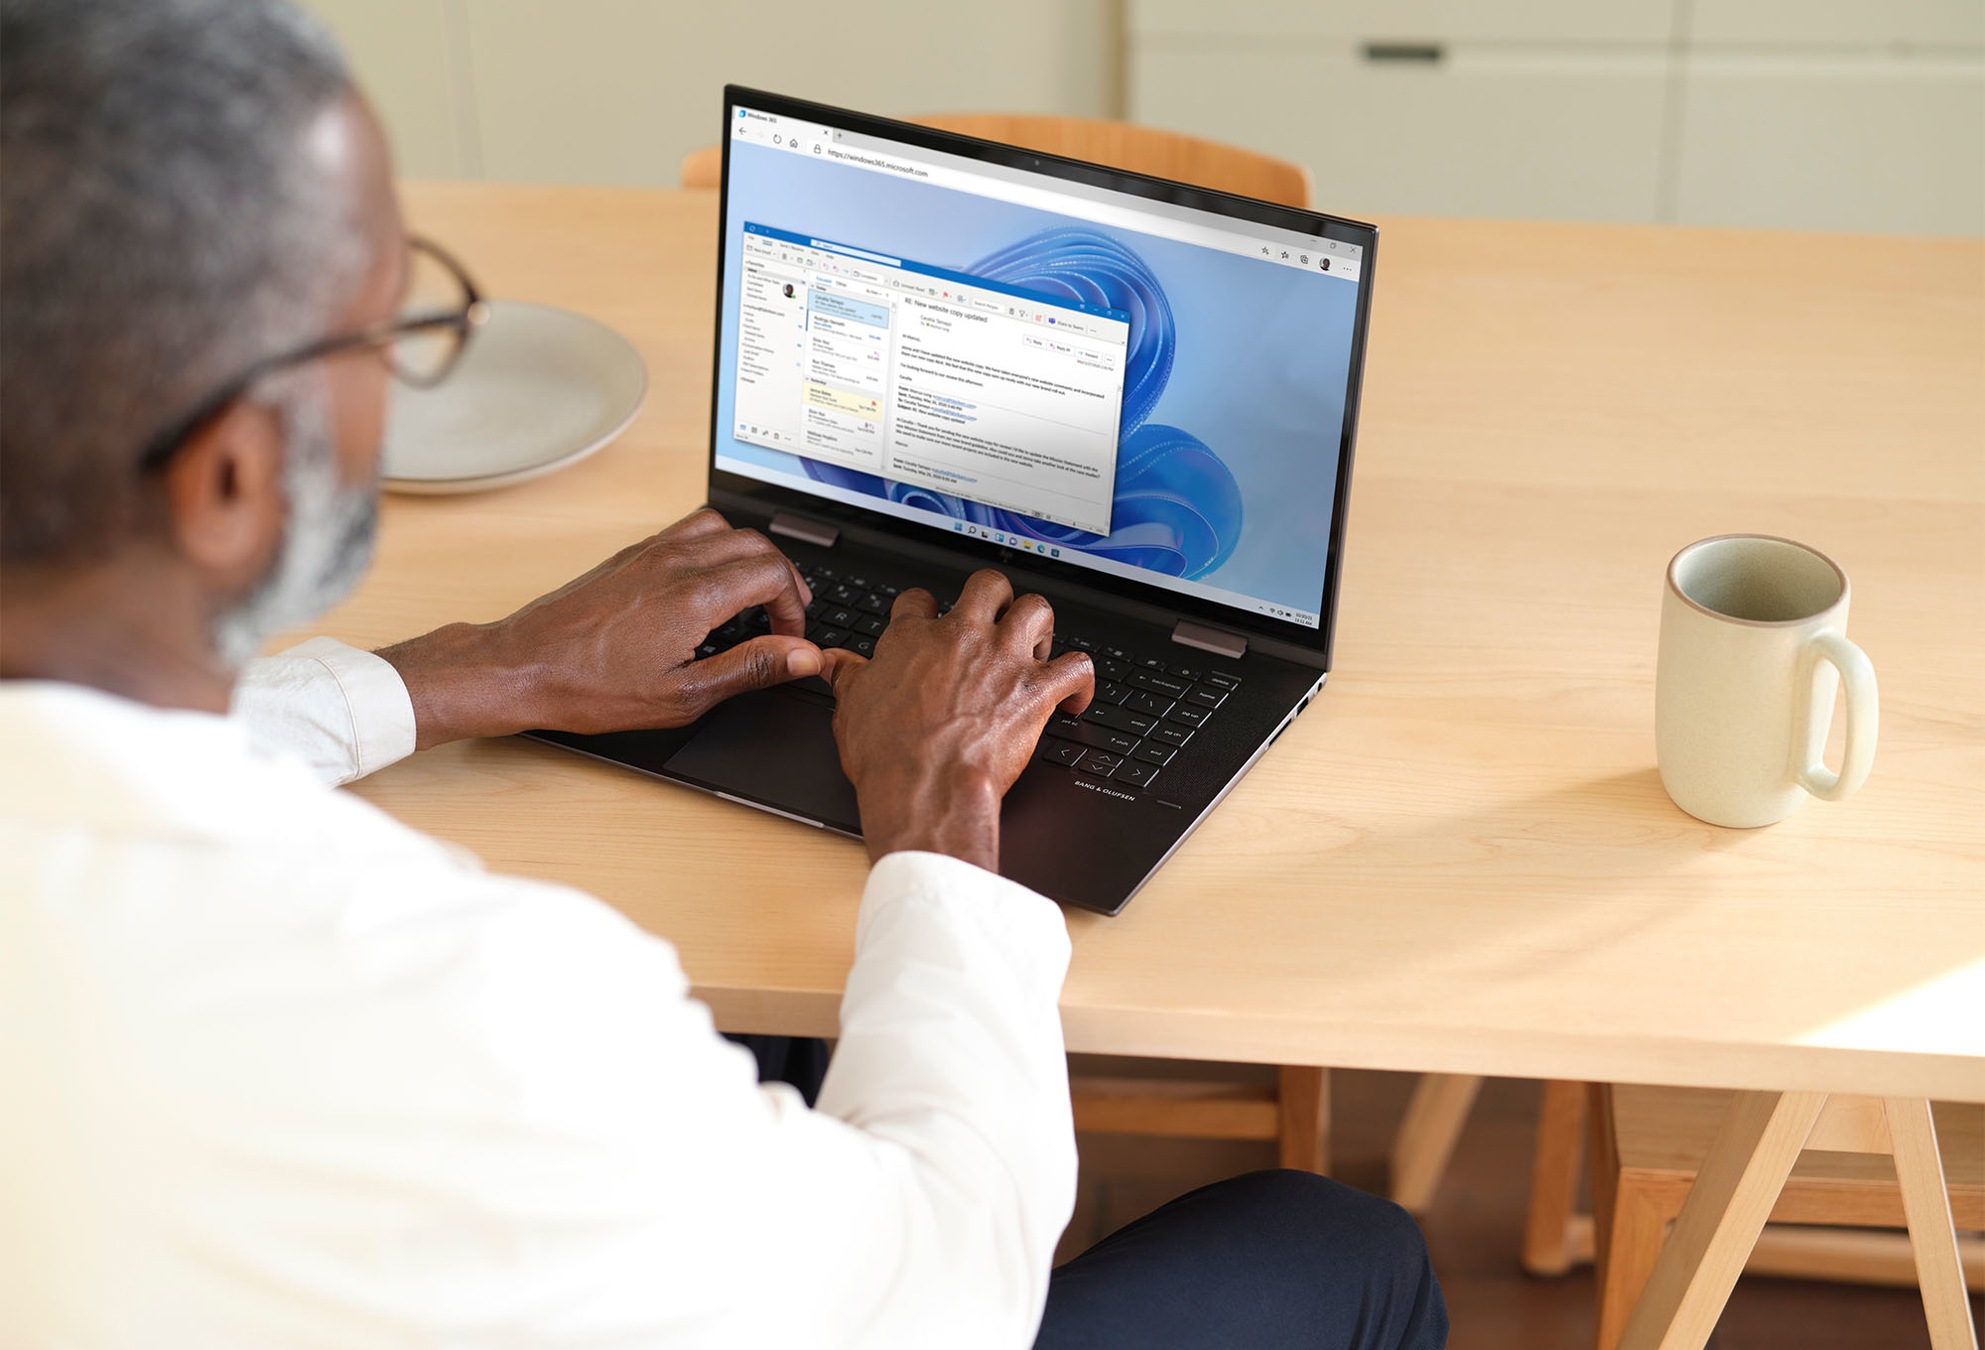 A person using Outlook on a laptop at a kitchen table.